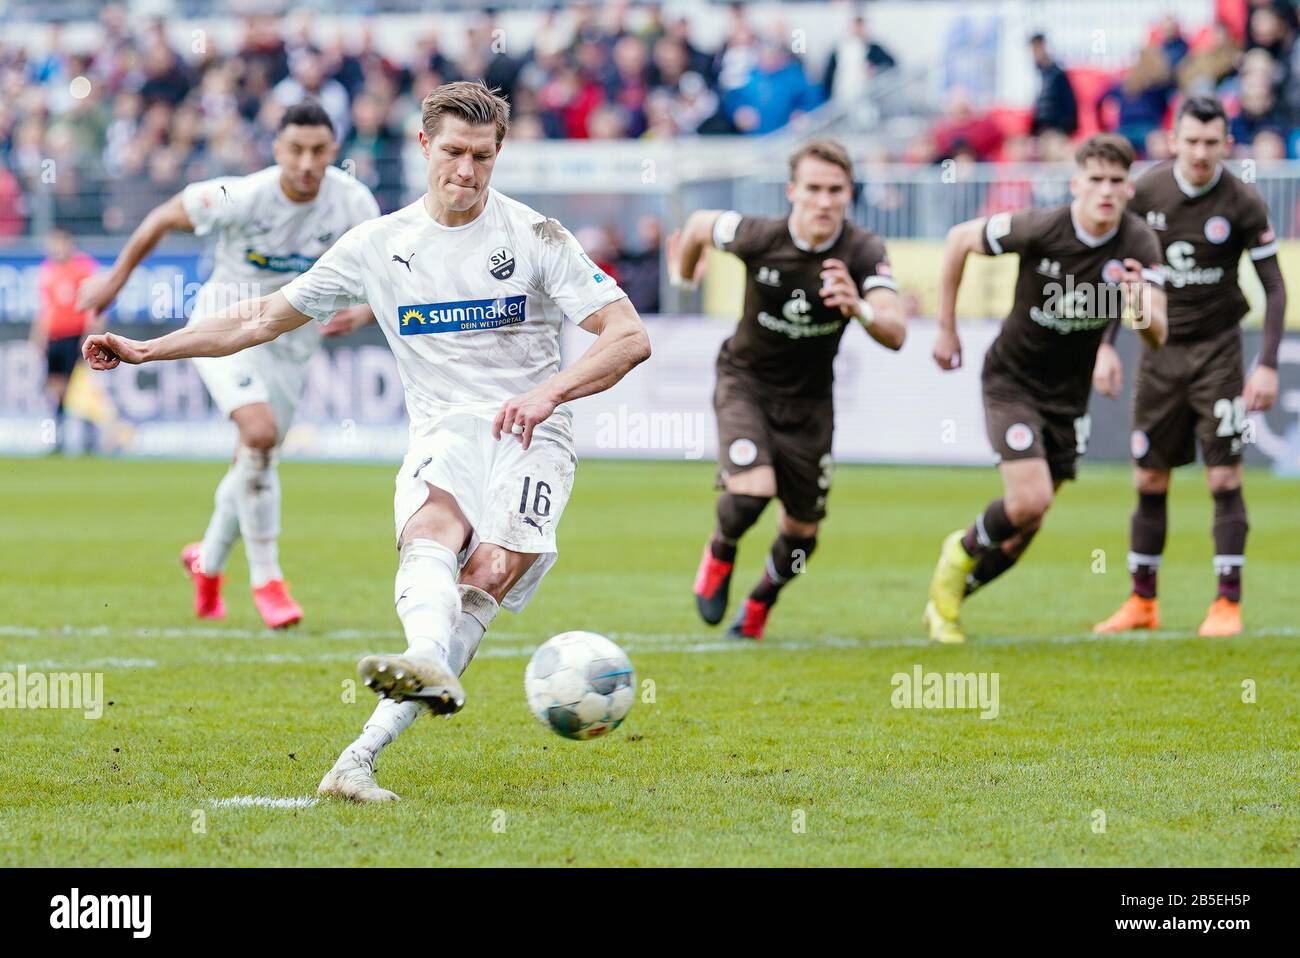 Sandhausen, Germany. 08th Mar, 2020. Football: 2nd Bundesliga, 25th matchday, SV Sandhausen - FC St. Pauli, Hardtwaldstadion. Sandhausen's Kevin Behrens scores the penalty goal for the 1:1. Credit: Uwe Anspach/dpa - IMPORTANT NOTE: In accordance with the regulations of the DFL Deutsche Fußball Liga and the DFB Deutscher Fußball-Bund, it is prohibited to exploit or have exploited in the stadium and/or from the game taken photographs in the form of sequence images and/or video-like photo series./dpa/Alamy Live News Stock Photo